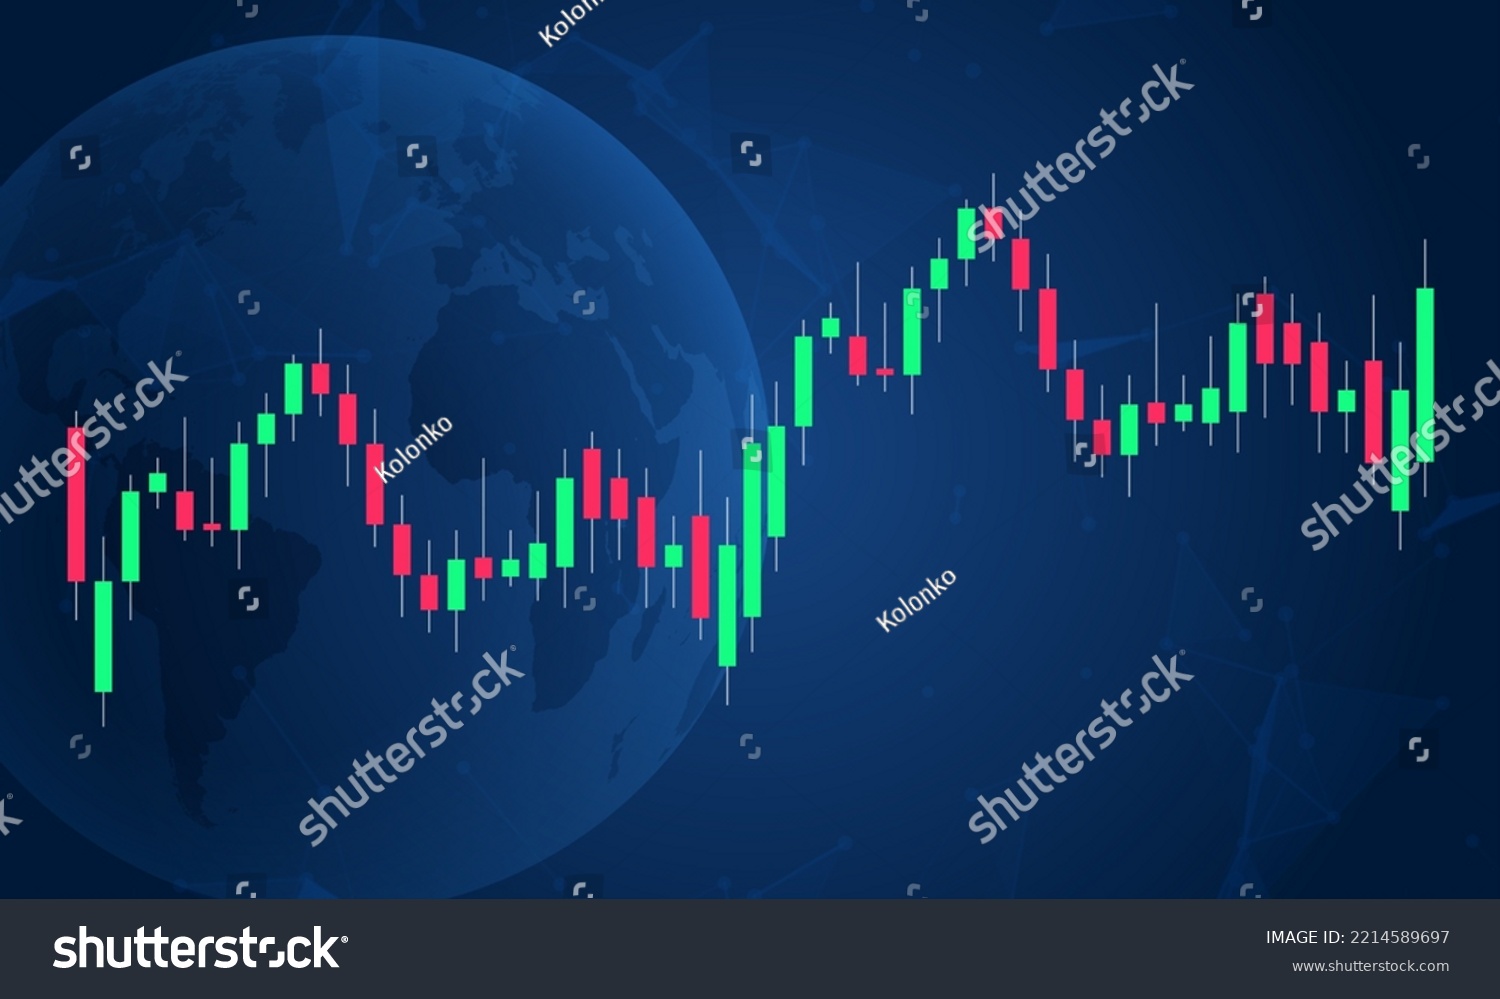 SVG of Chart candle stock graph forex market. Trade candle chart stock finance price exchange background crypto currency svg